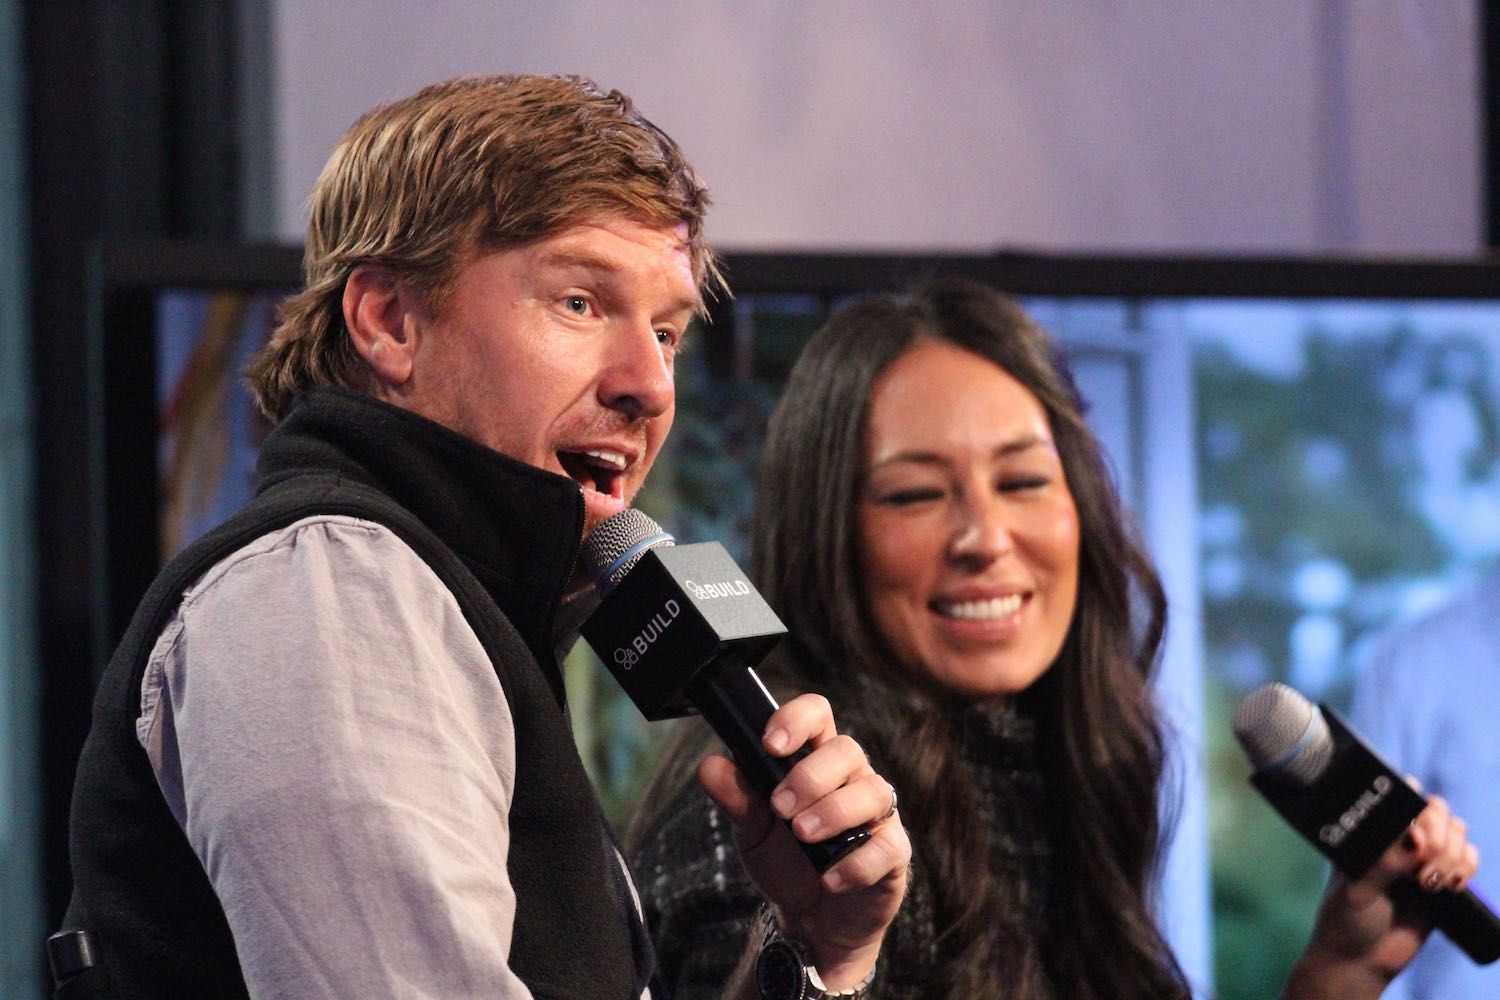 'Fixer Upper' stars Chip Gaines and Joanna Gaines speaking into microphones